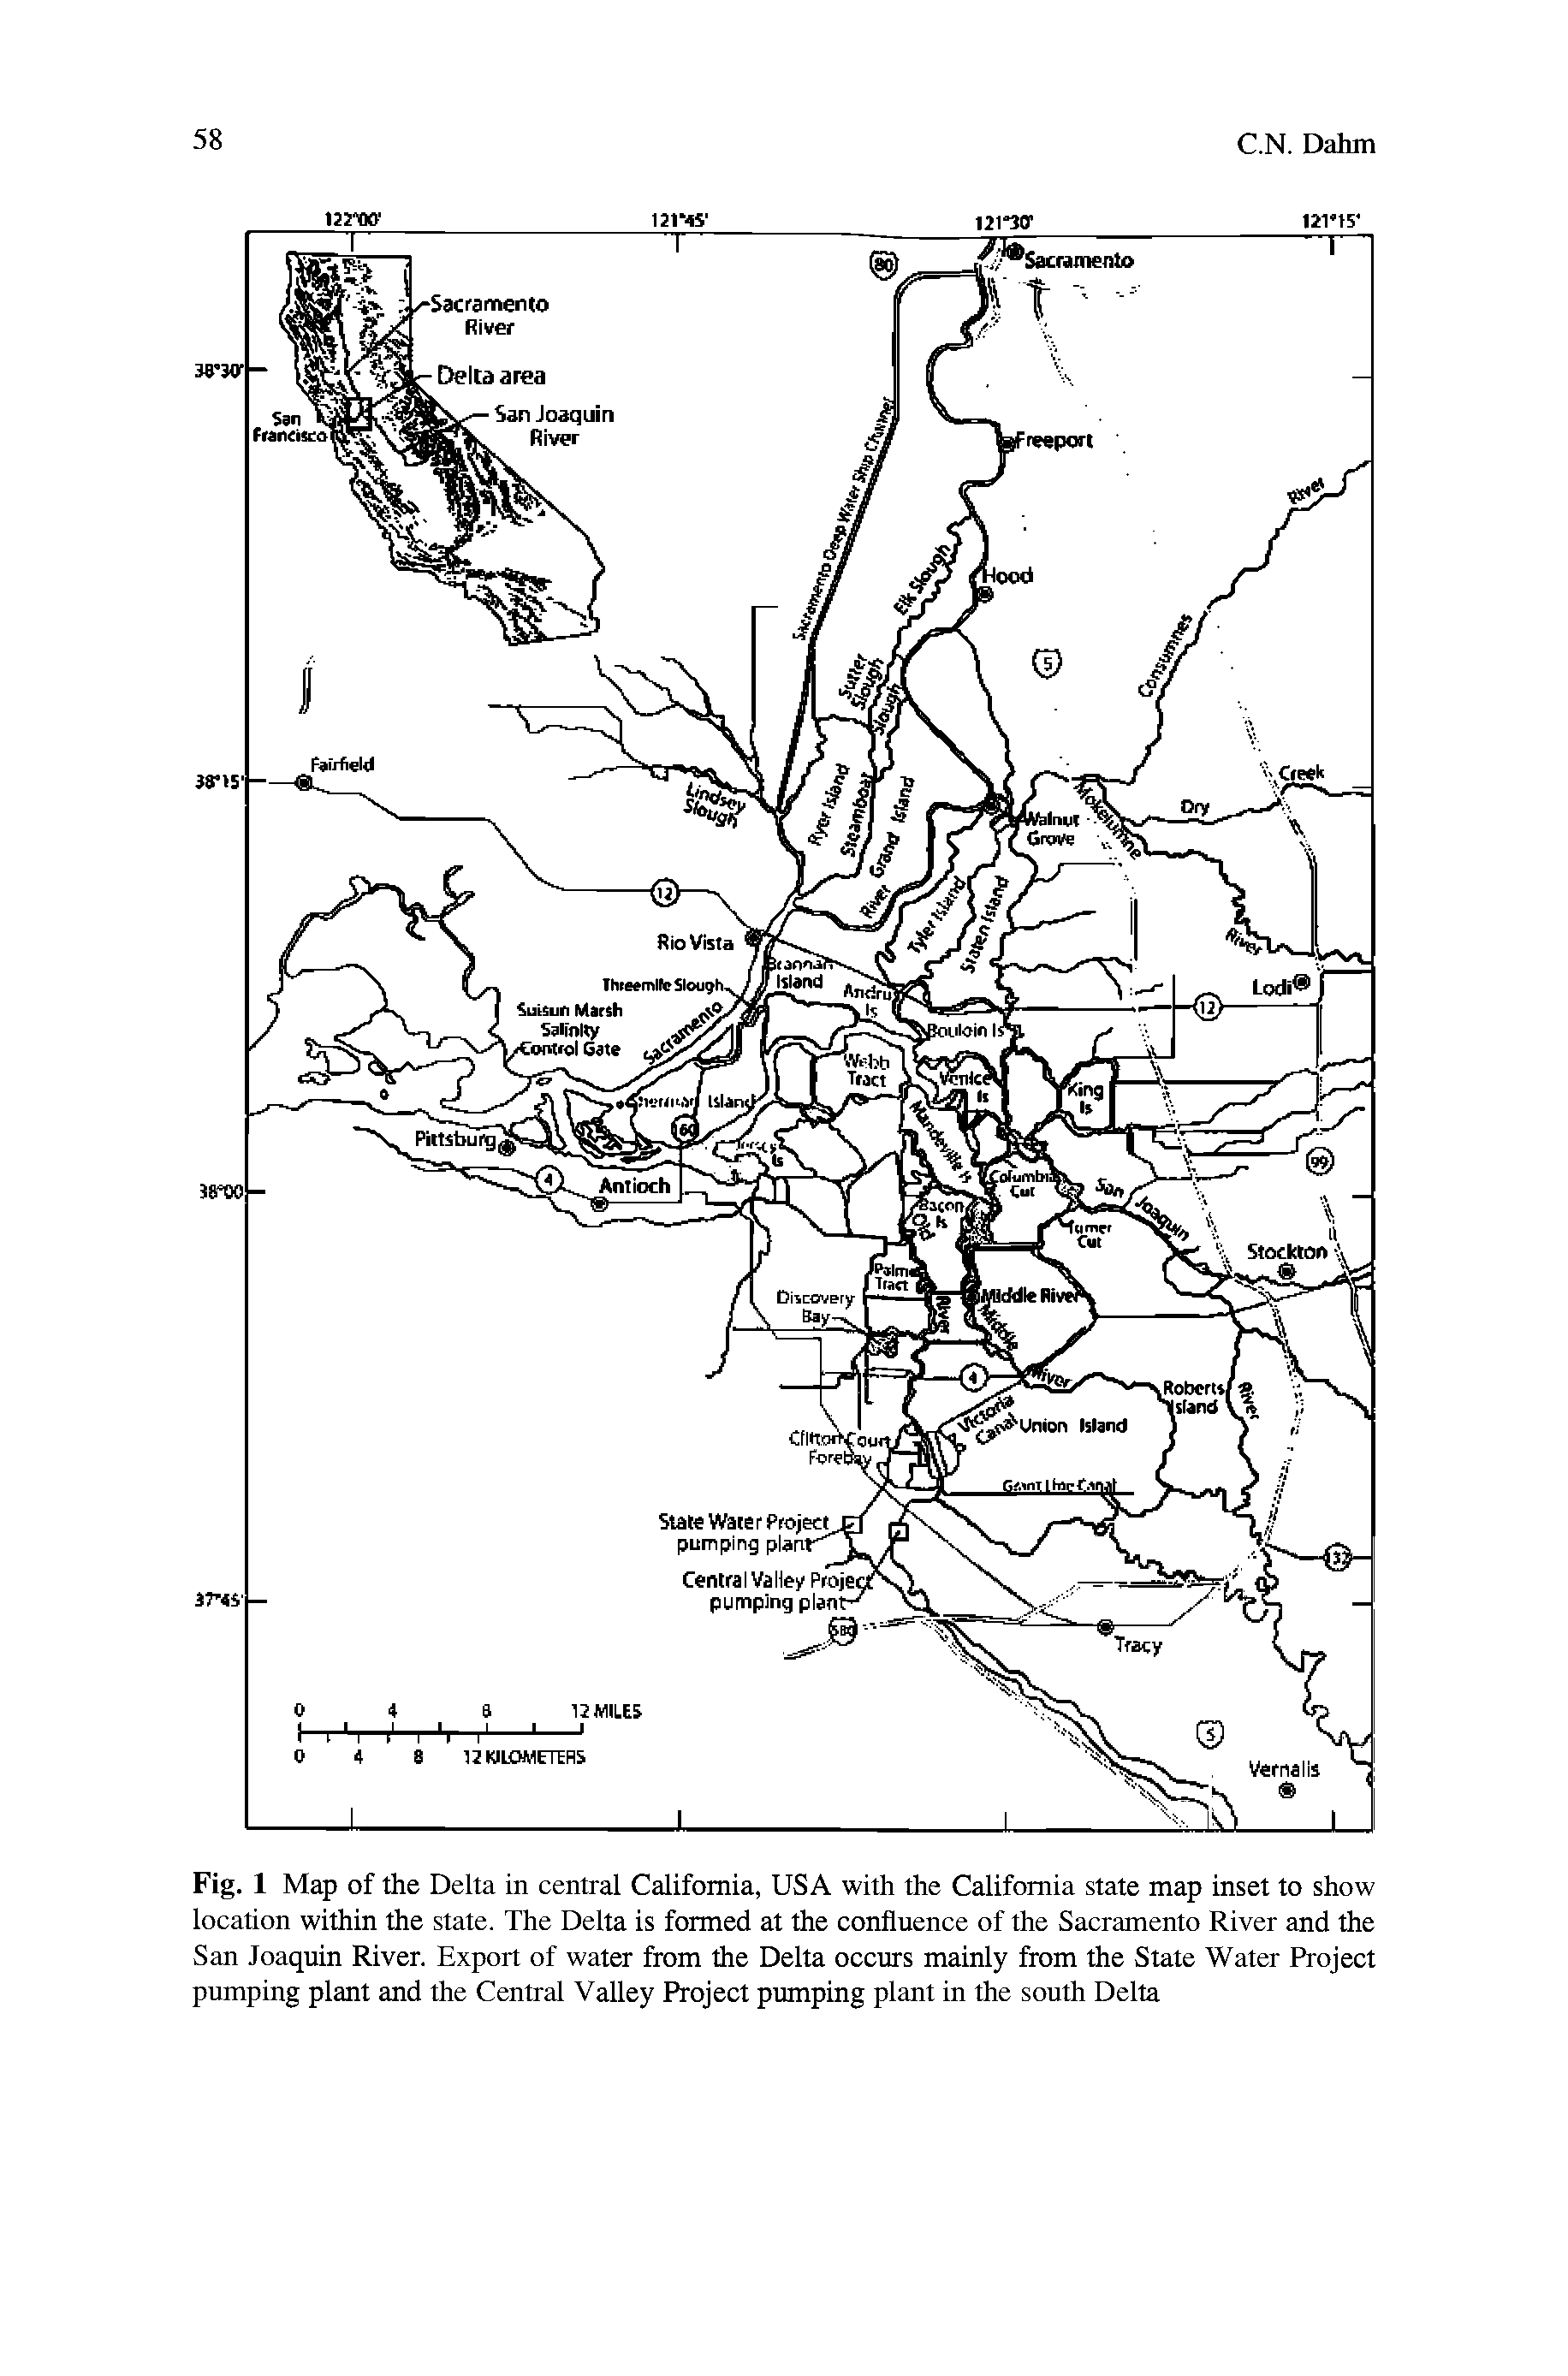 Fig. 1 Map of the Delta in central California, USA with the California state map inset to show location within the state. The Delta is formed at the confluence of the Sacramento River and the San Joaquin River. Export of water from the Delta occurs mainly from the State Water Project pumping plant and the Central Valley Project pumping plant in the south Delta...